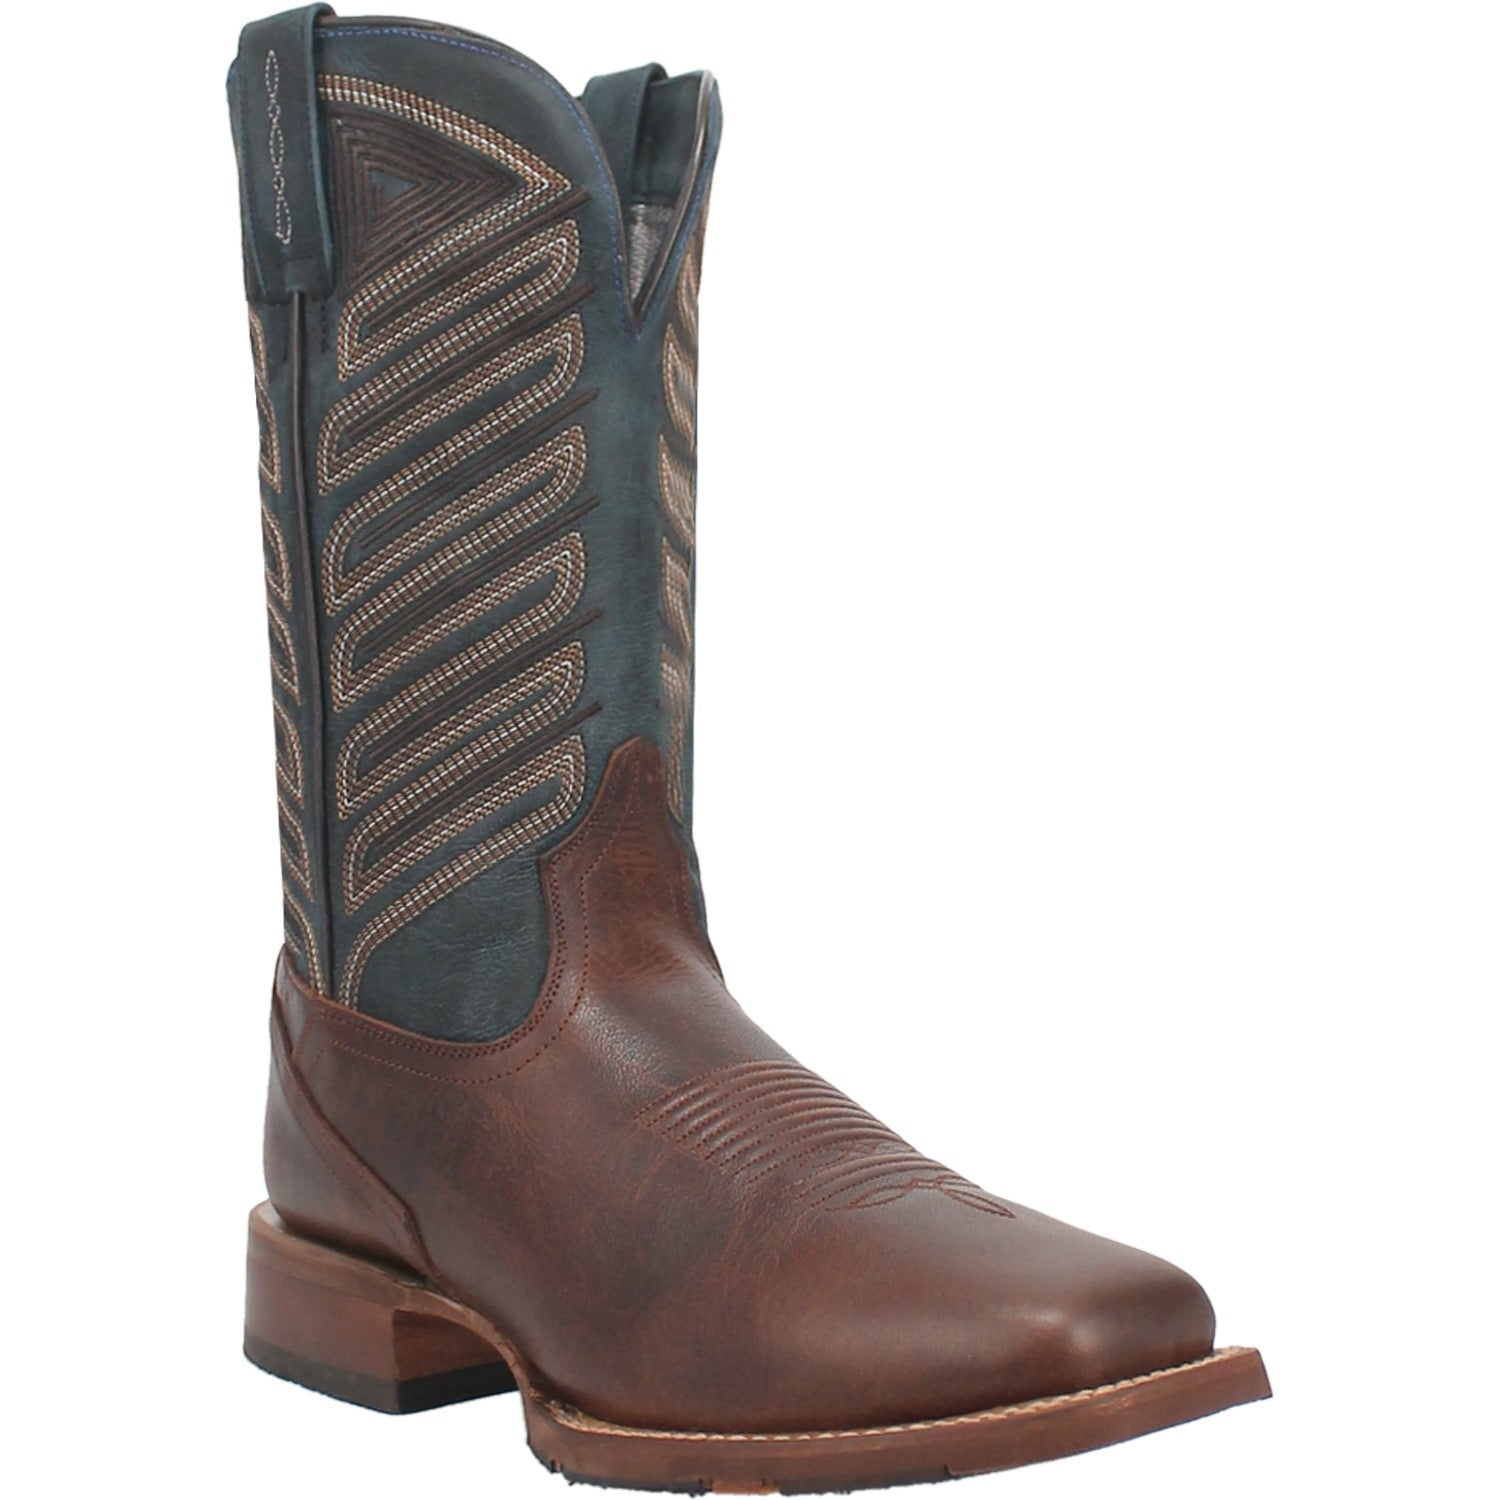 IVAN LEATHER BOOT Cover